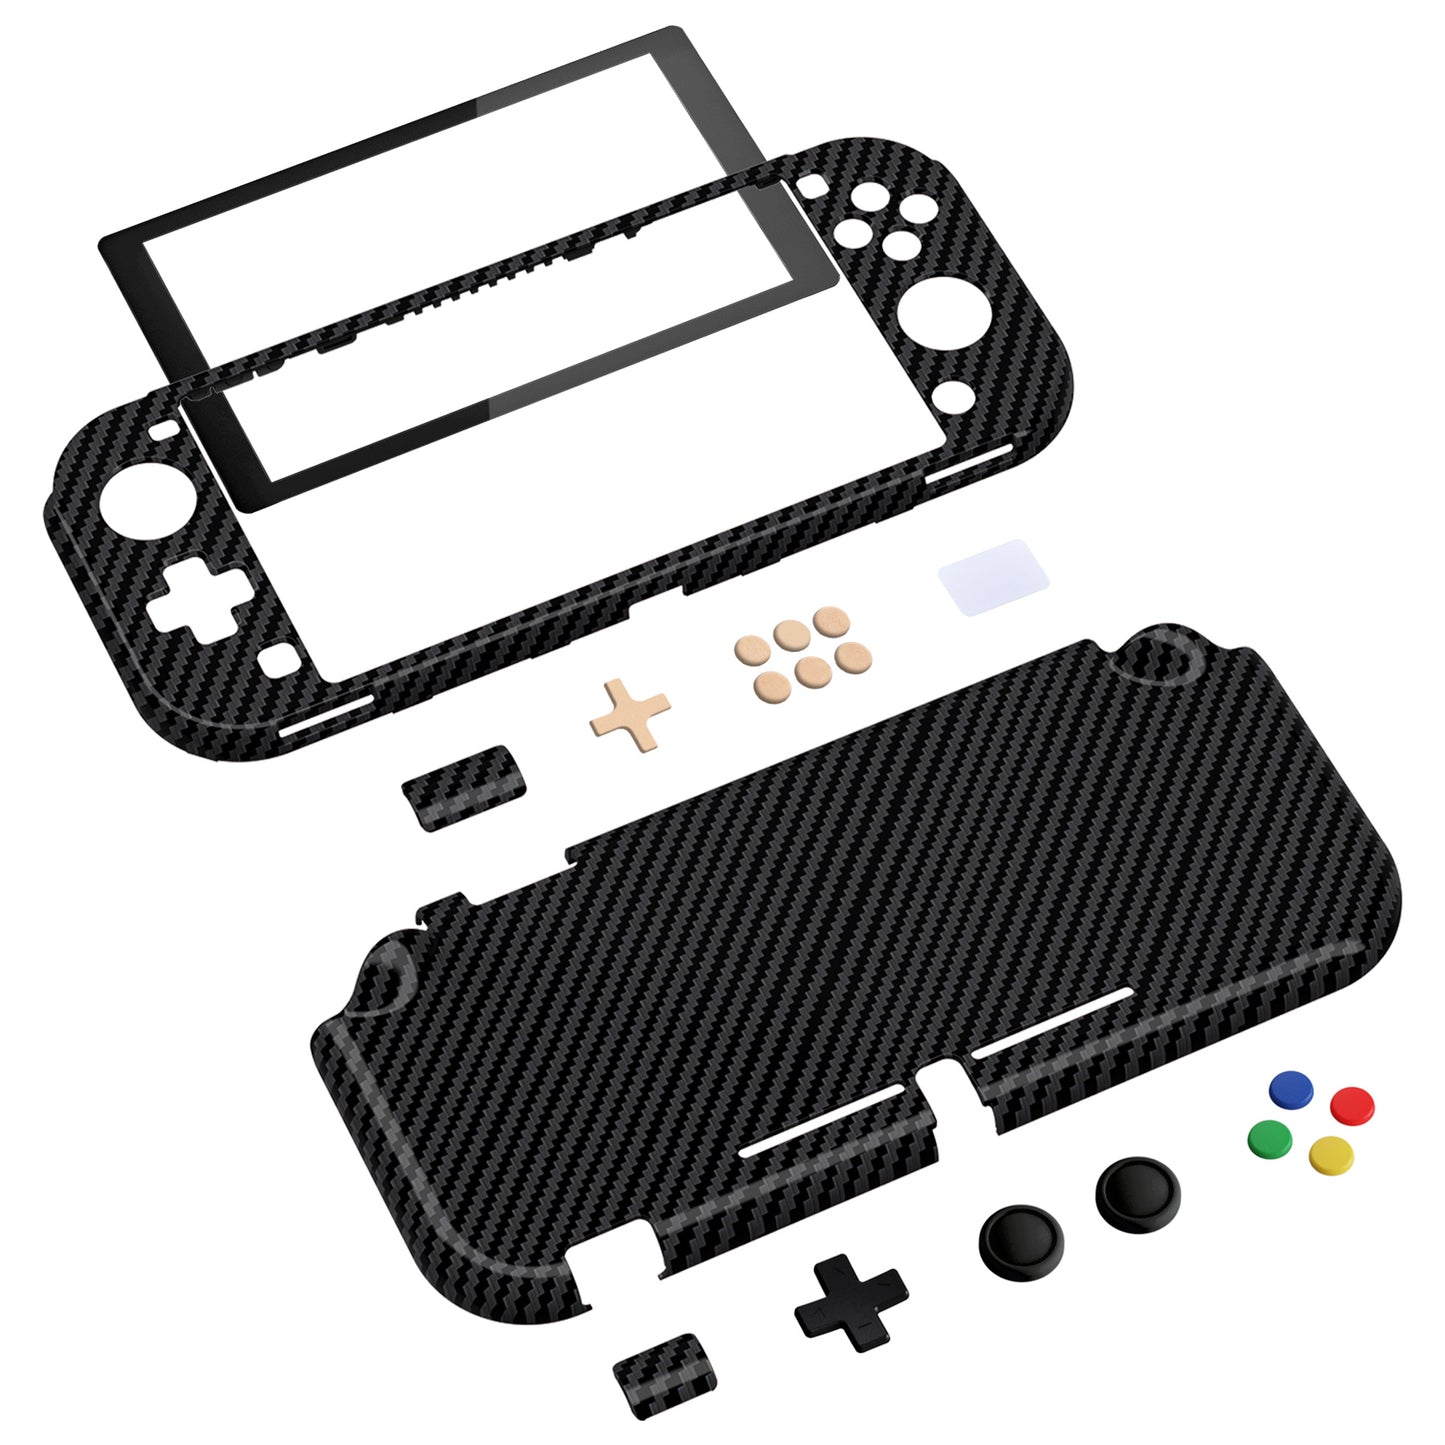 PlayVital Graphite Carbon Fiber Protective Grip Case for Nintendo Switch Lite, Hard Cover Protector for Nintendo Switch Lite - Screen Protector & Thumb Grips & Buttons Stickers Included - YYNLS001 PlayVital